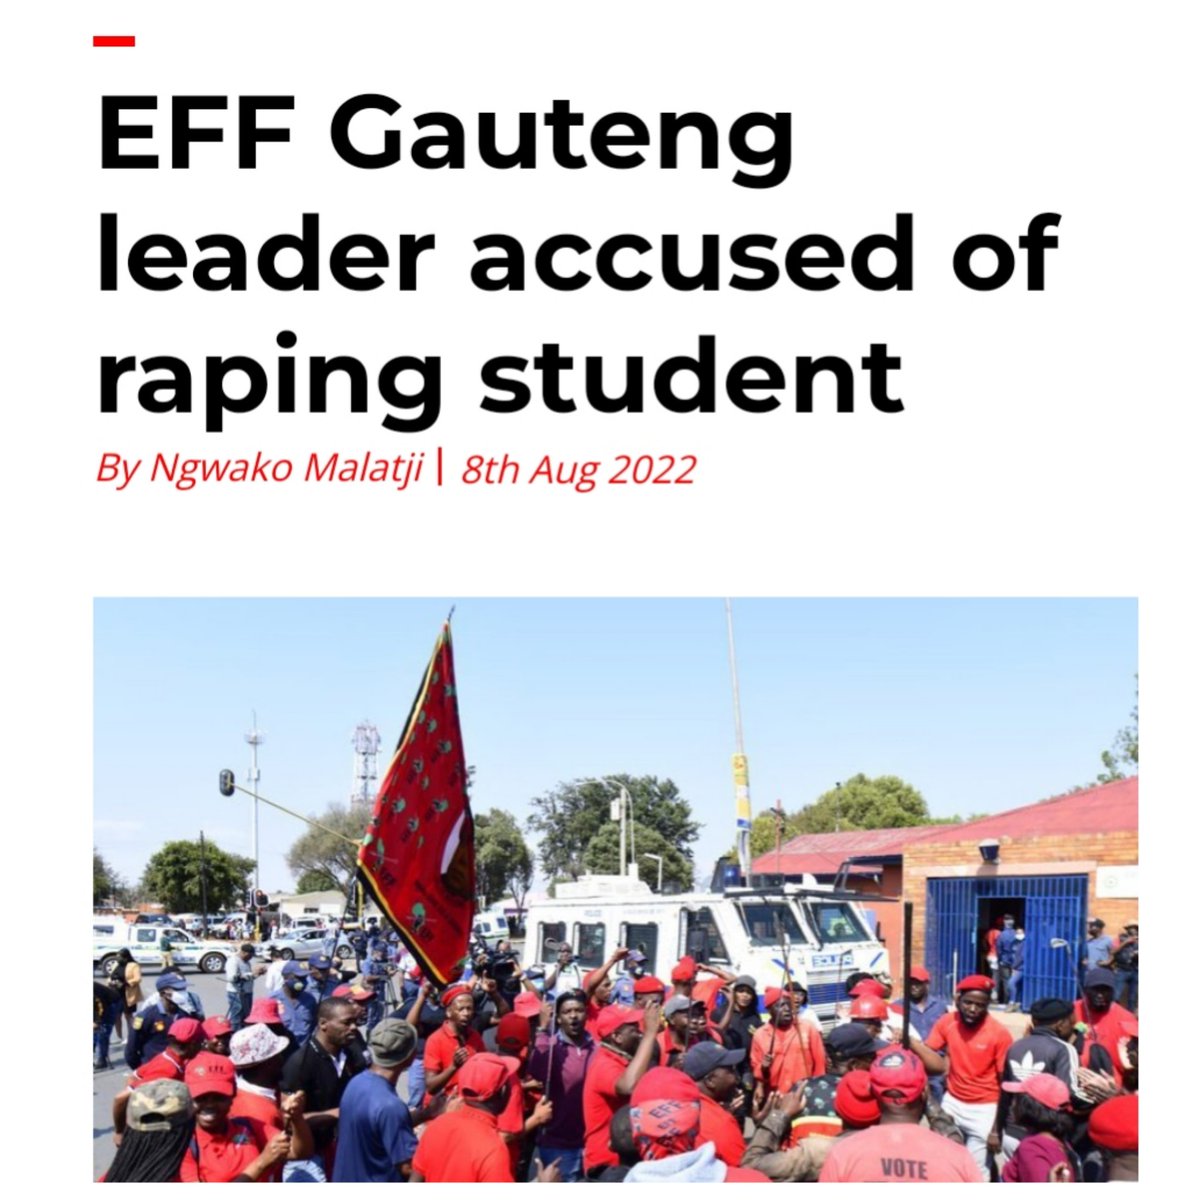 Julius Malema of The EFF Protected Mbuyiseni Ndlozi against rape allegations and now they ignoring these another serious rape allegations but has the loudest mouths about Enoch Godongwana Disgusting 
#RipBruno Berita Nota Berita Mihlali Sister Bettina